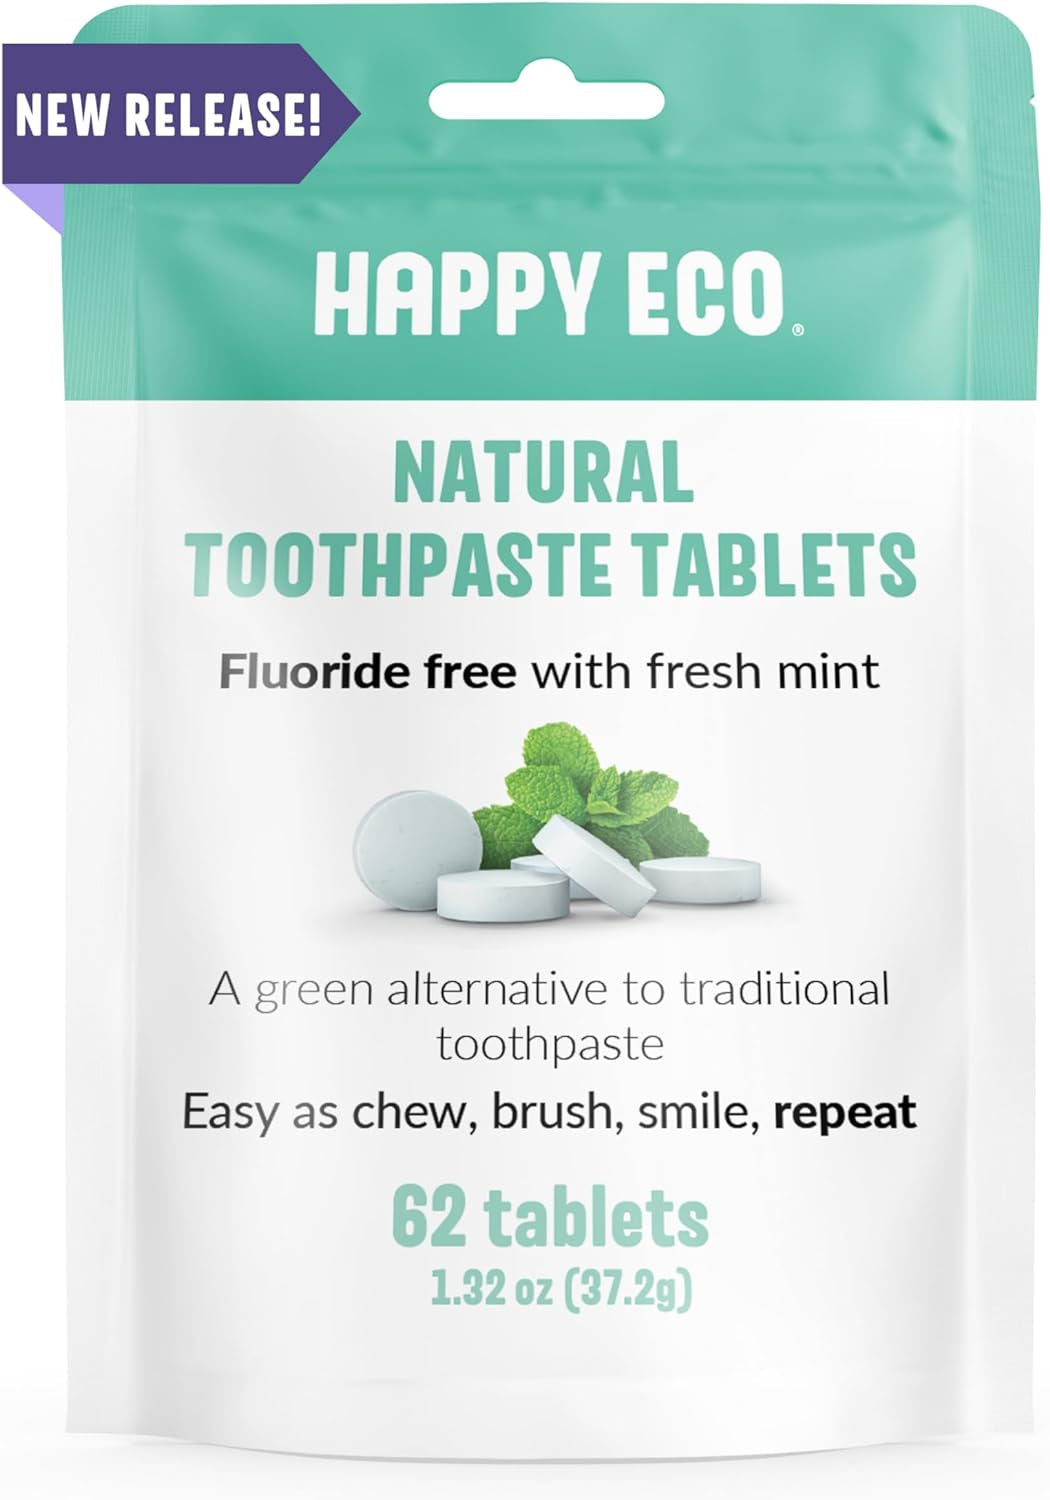 Chewable Toothpaste Tablets (62Pcs) - Eco Friendly Toothpaste -Fluoride Free Toothpaste Tabs - All Natural, SLS Free Ingredients for Adults - Mint Travel Sized Oral Care